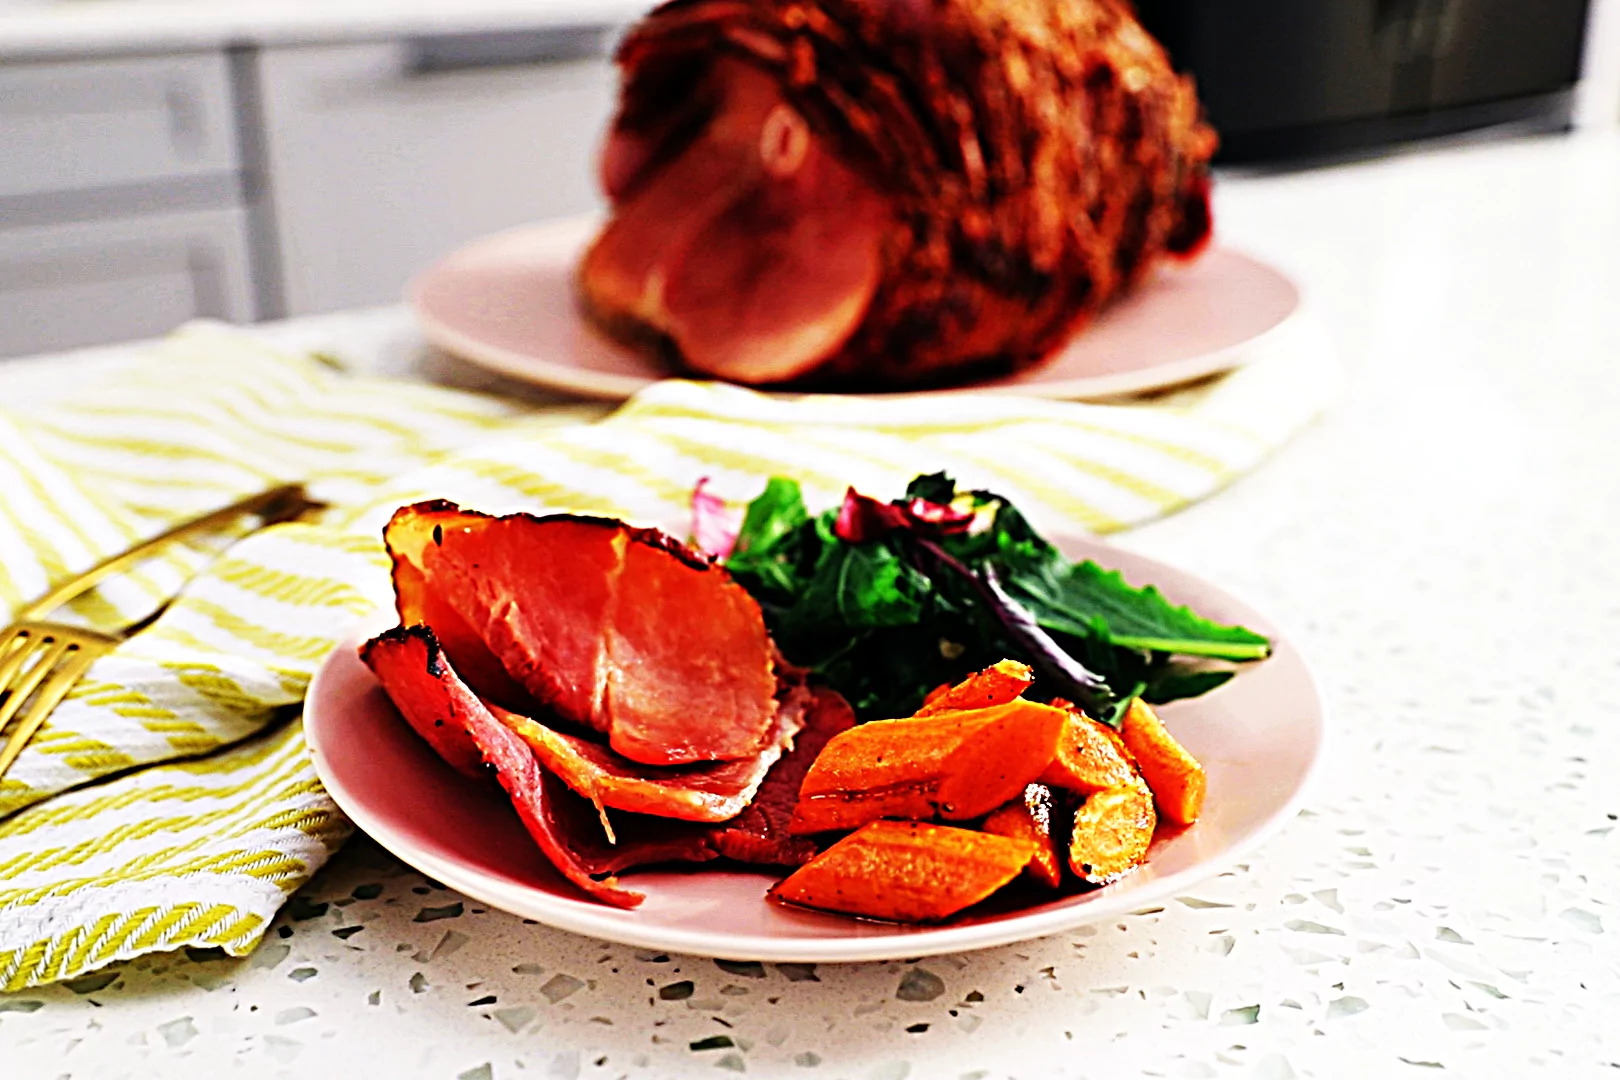 Stupid-Easy Recipe for Low-Carb Garlic Mustard Baked Ham (#1 Top-Rated)